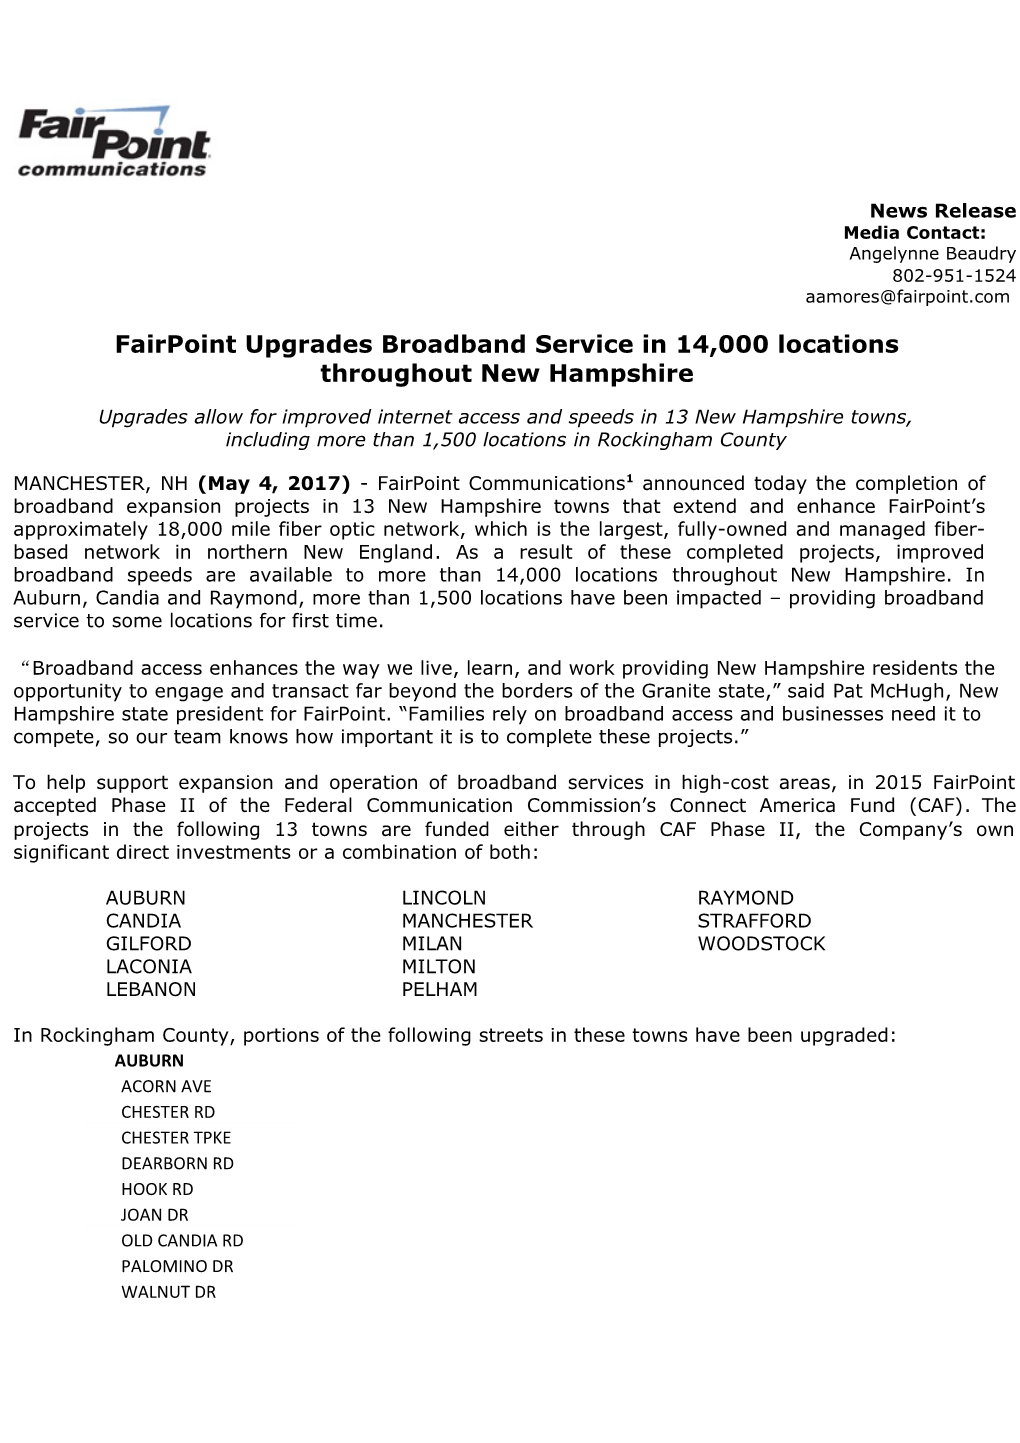 Fairpoint Upgrades Broadband Service in 14,000 Locations Throughout New Hampshire s1